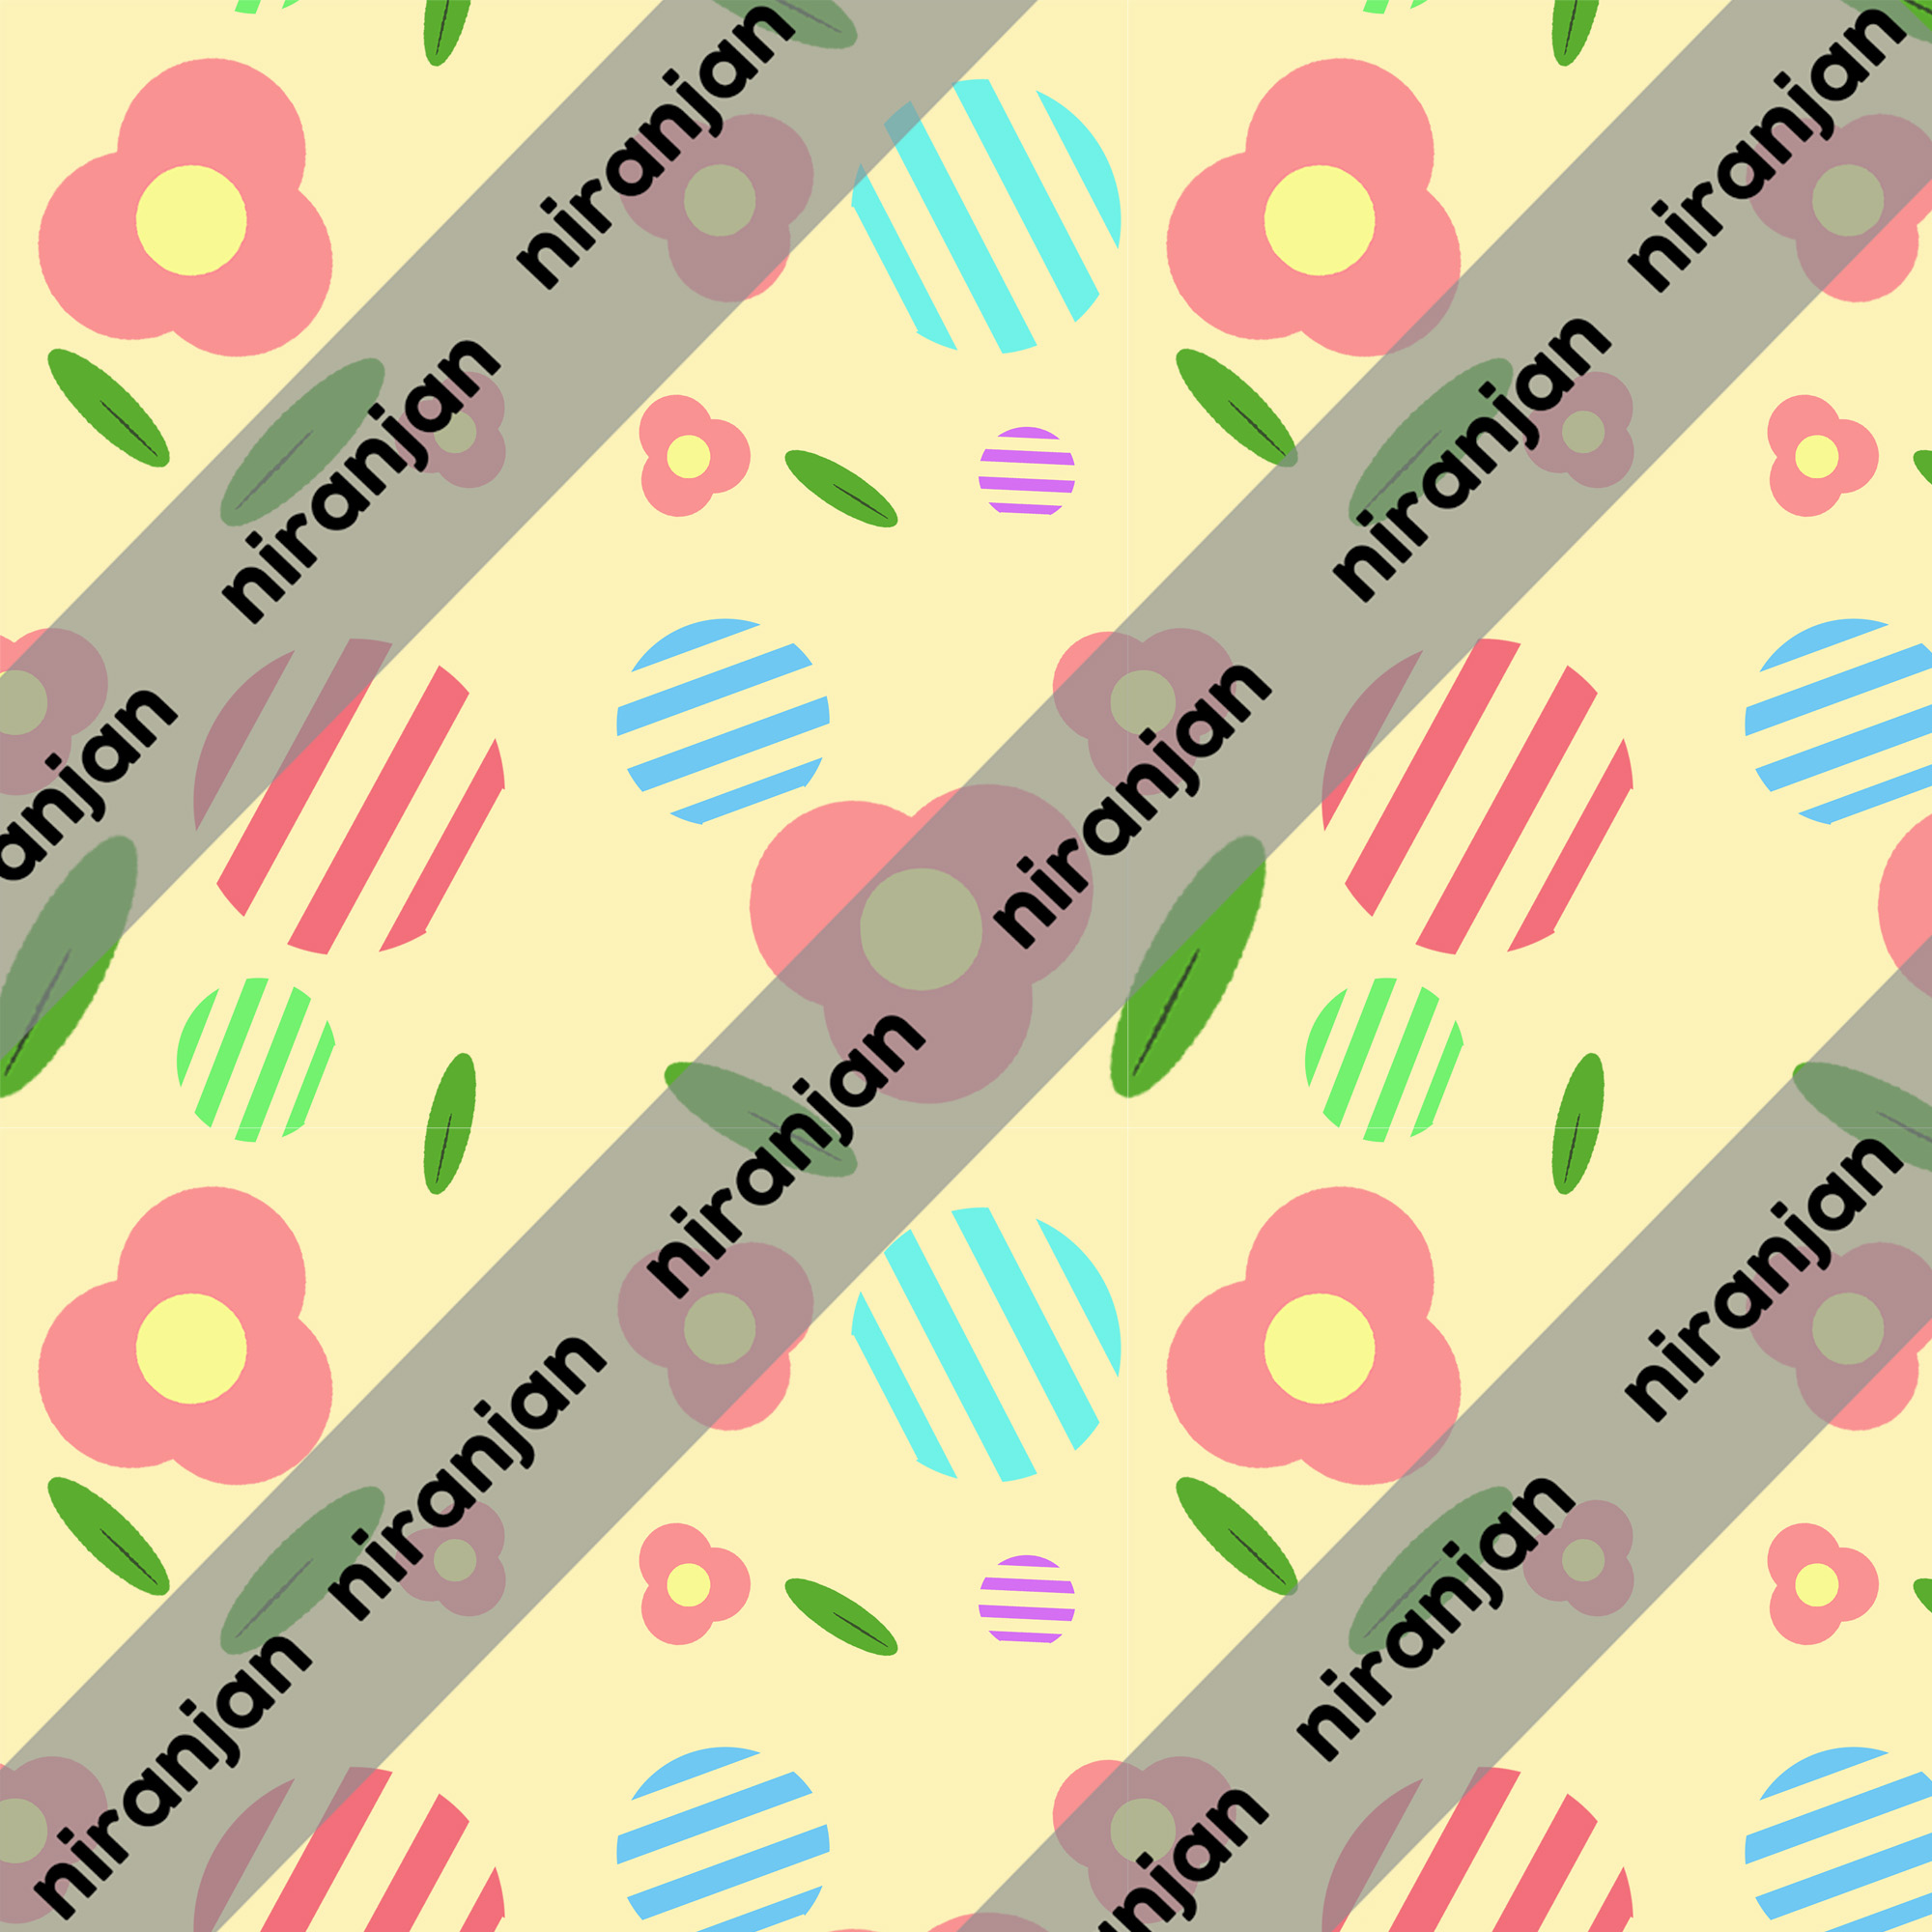 Pattern of flowers and stripes on a yellow background.